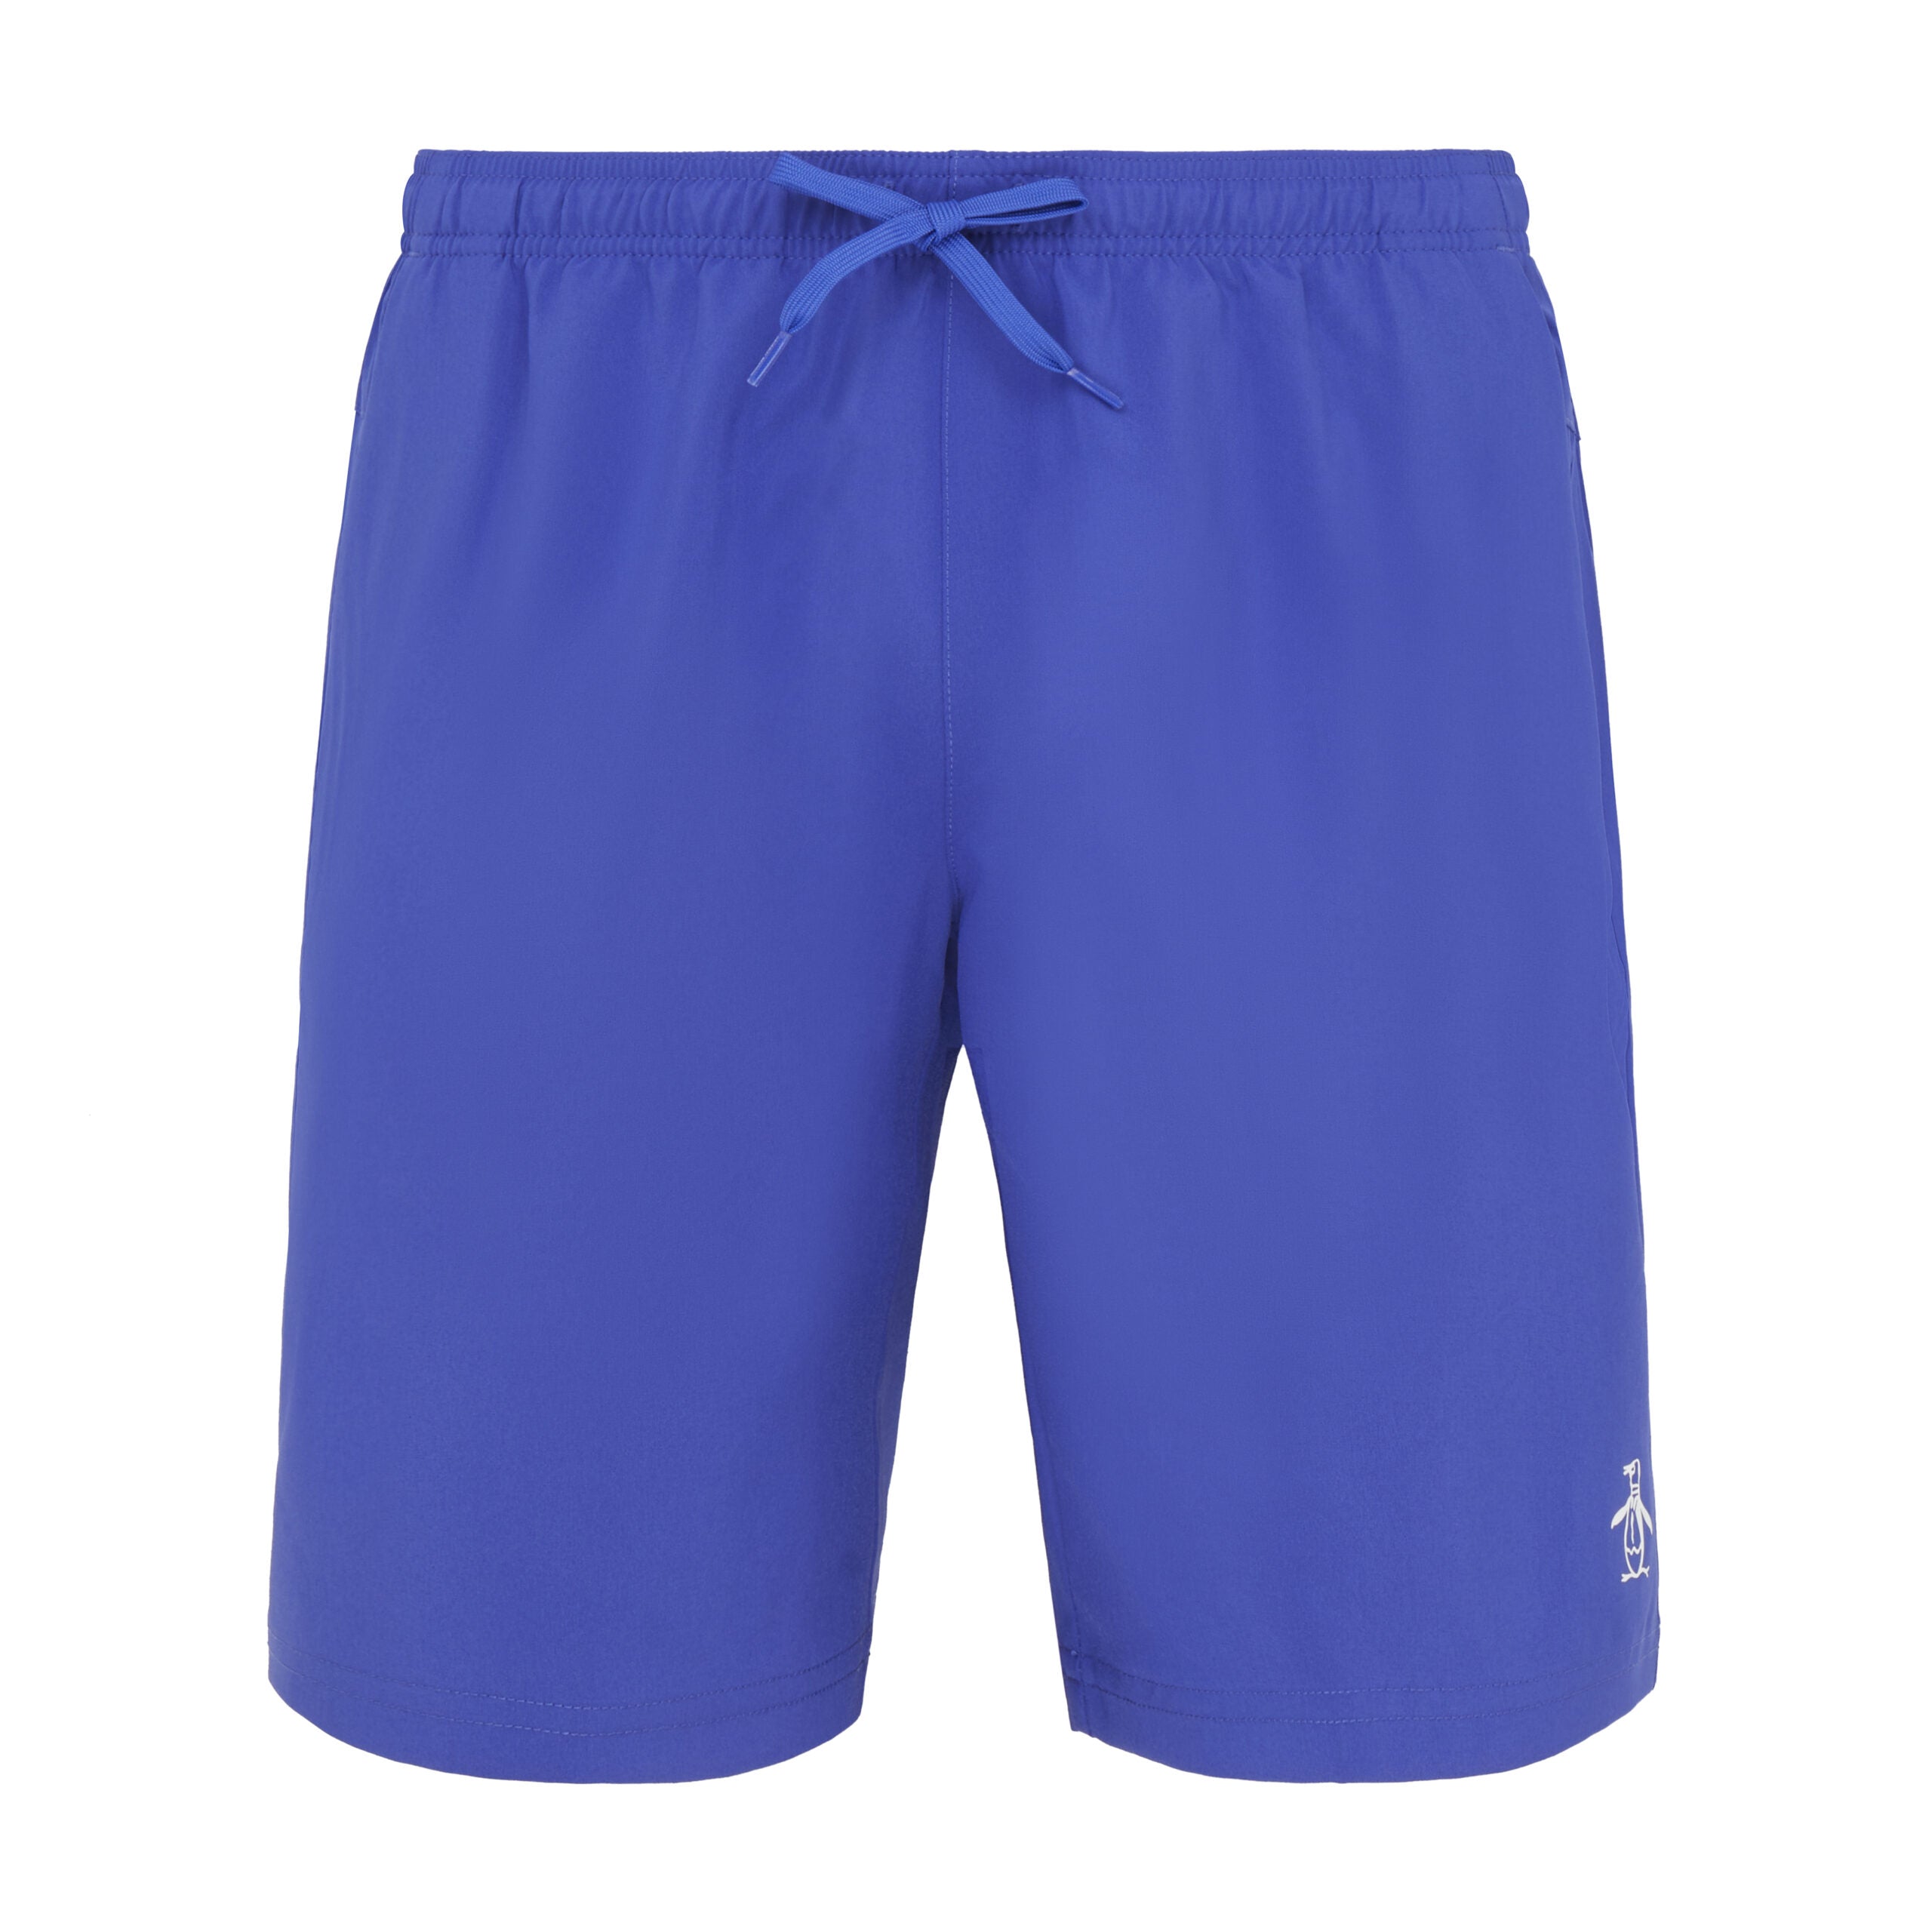 View Solid Tennis Shorts In Bluing information